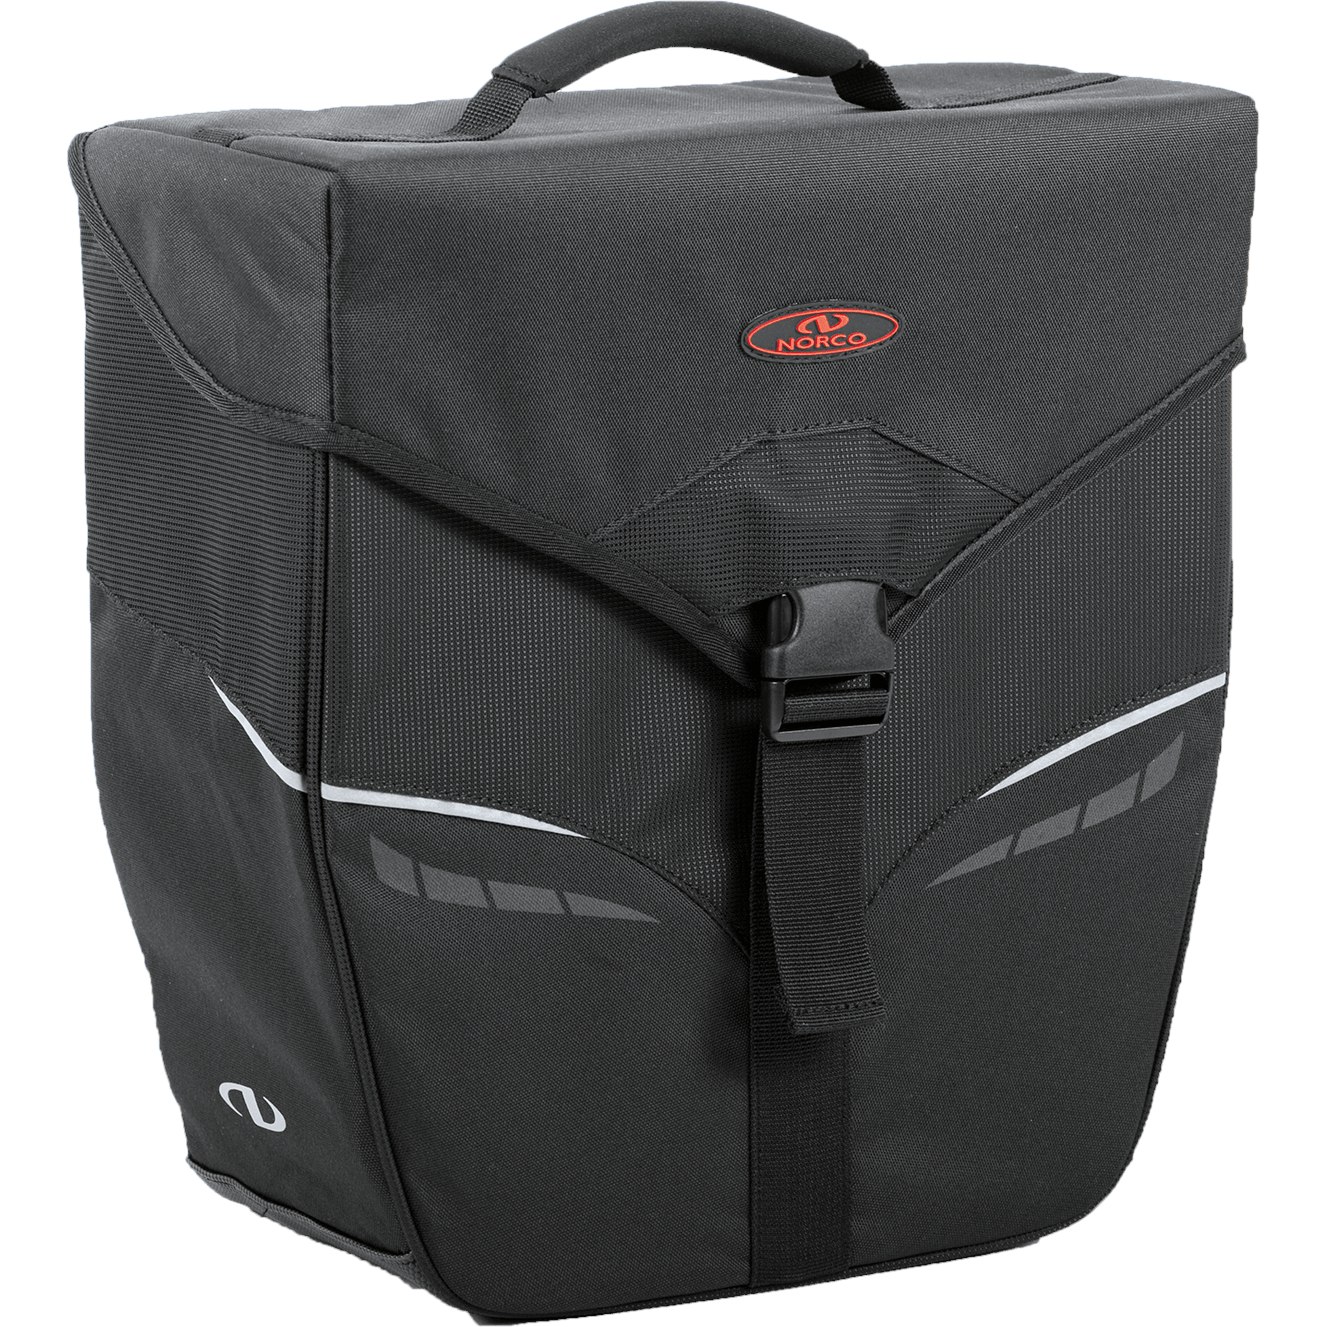 Picture of Norco Idaho City Bag 0206CKS - 18L - black